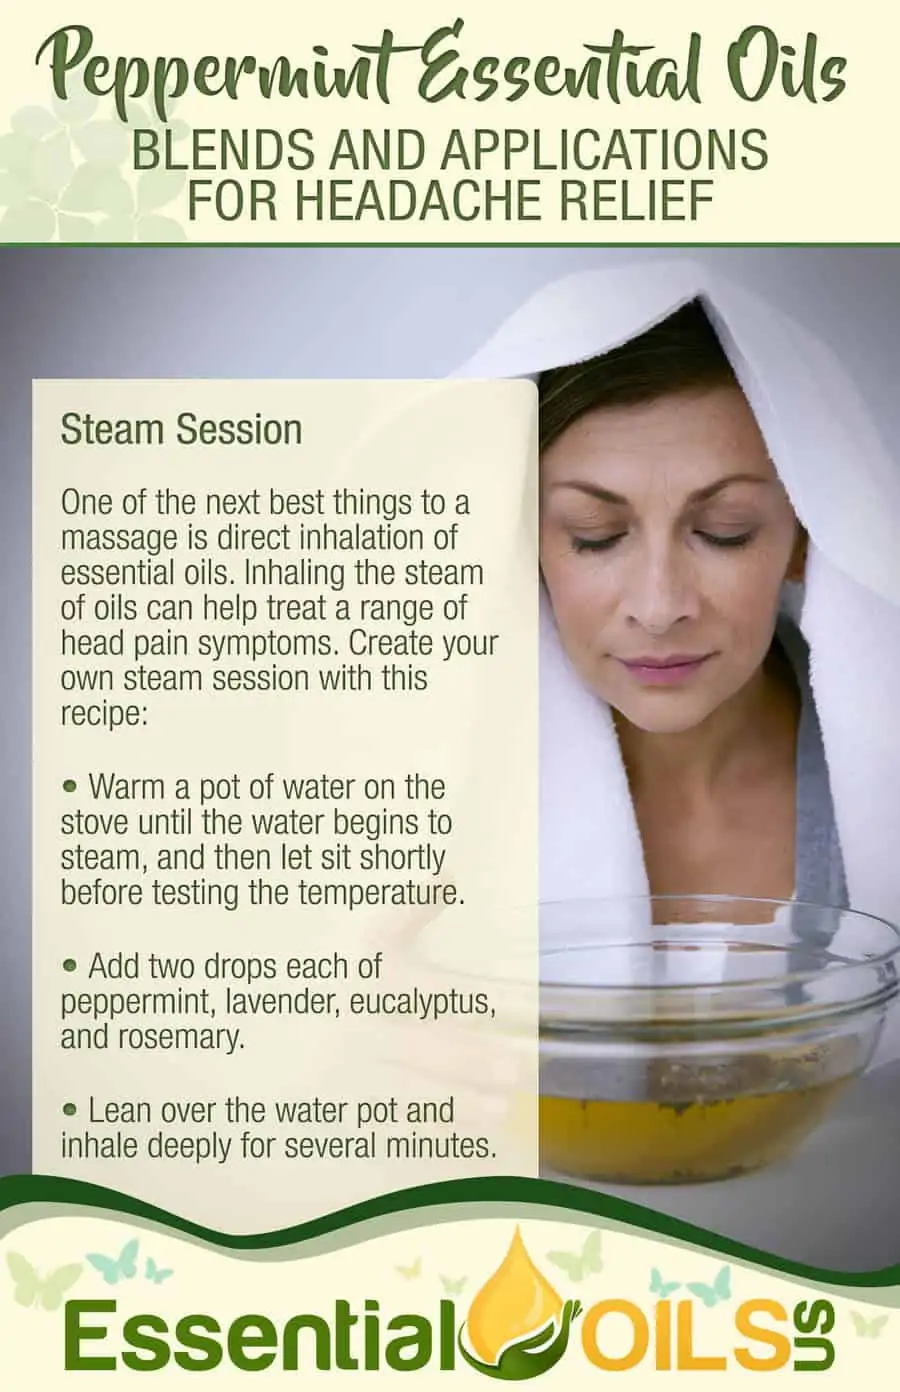 Peppermint Essential Oils For Headache Relief - Steam Session